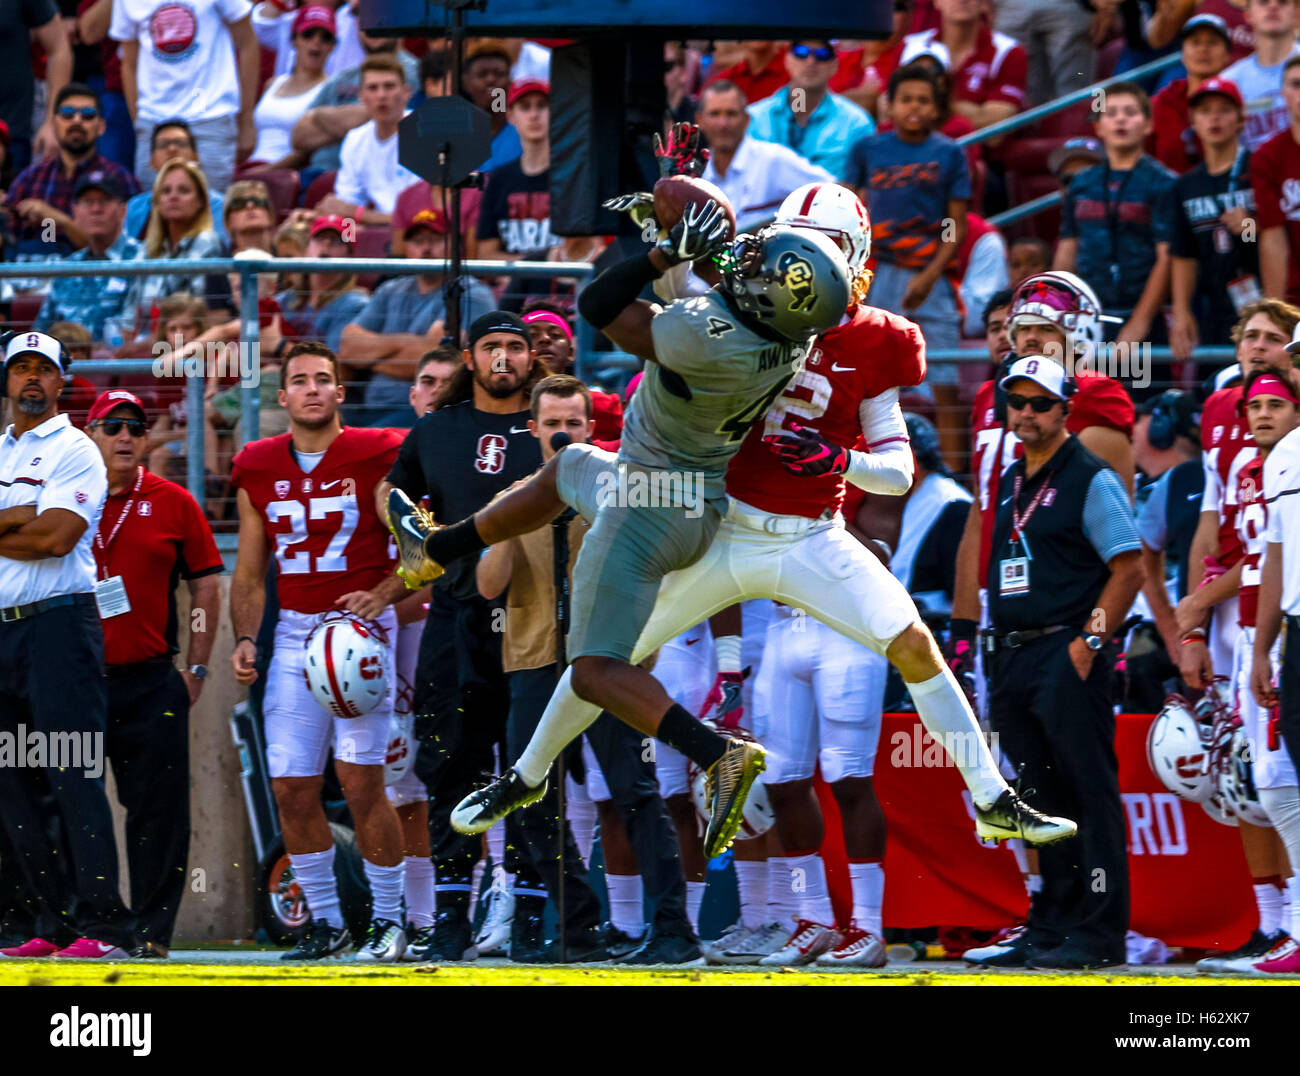 Palo Alto, California, USA. 22nd Oct, 2016. Colorado's Chidobe Awuzie (4) defends a Ryan Burns pass in NCAA football action at Stanford University, featuring the Colorado Buffaloes visiting the Stanford Cardinal. Colorado won the game, 10-5. © Seth Riskin/ZUMA Wire/Alamy Live News Stock Photo